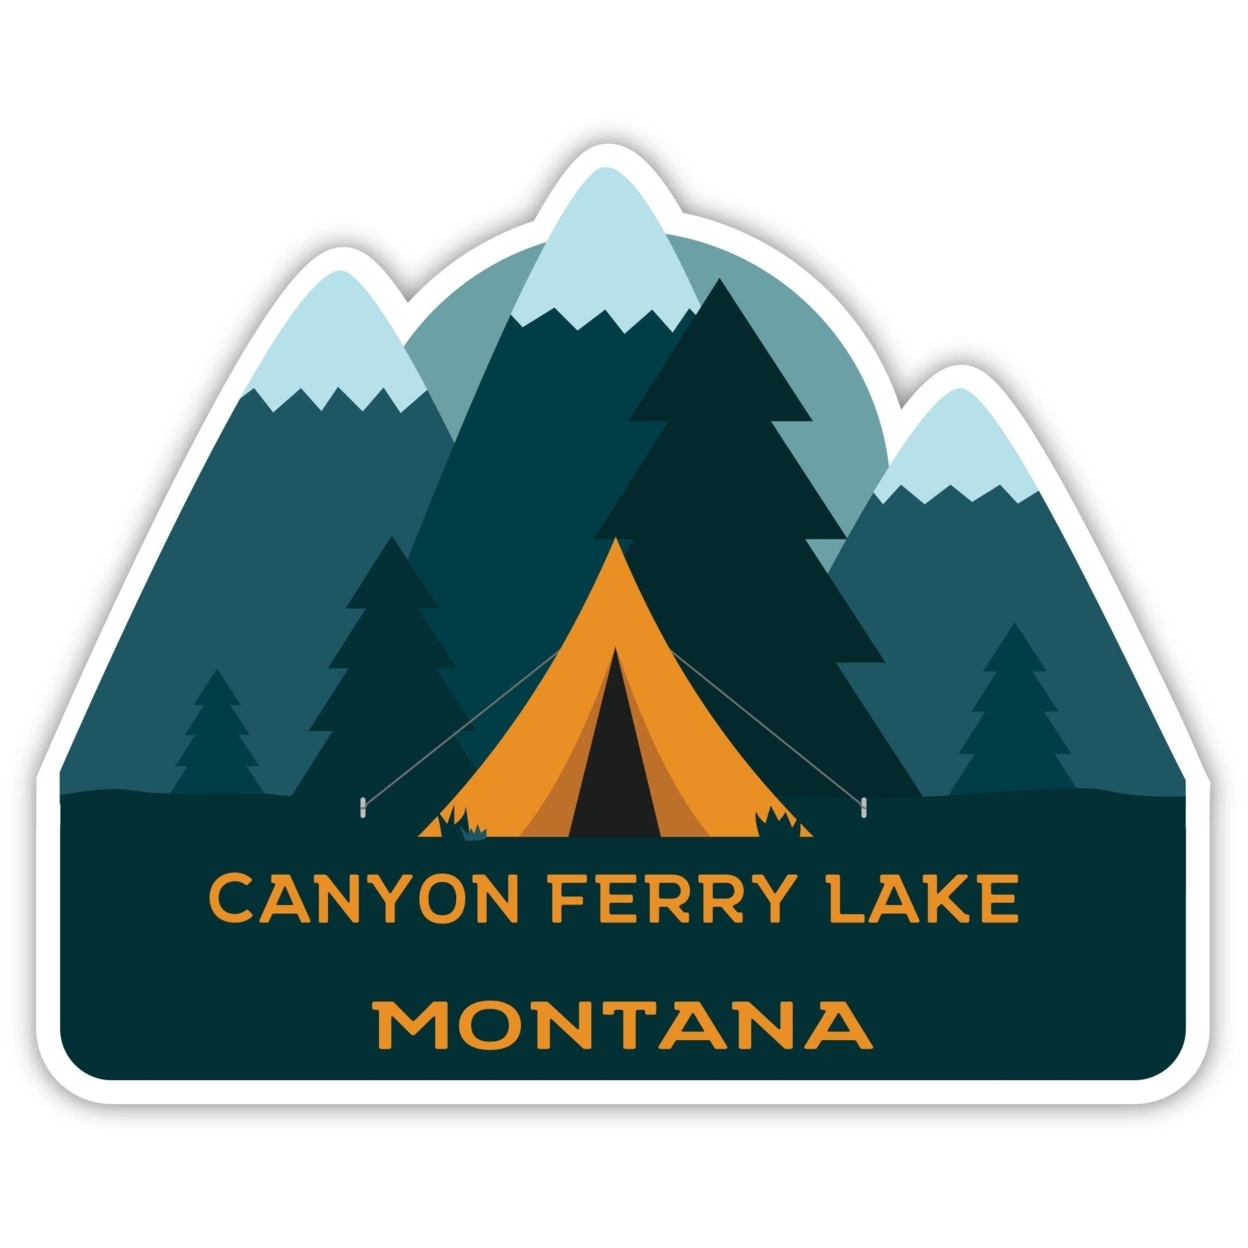 Canyon Ferry Lake Montana Souvenir Decorative Stickers (Choose Theme And Size) - 4-Pack, 8-Inch, Tent